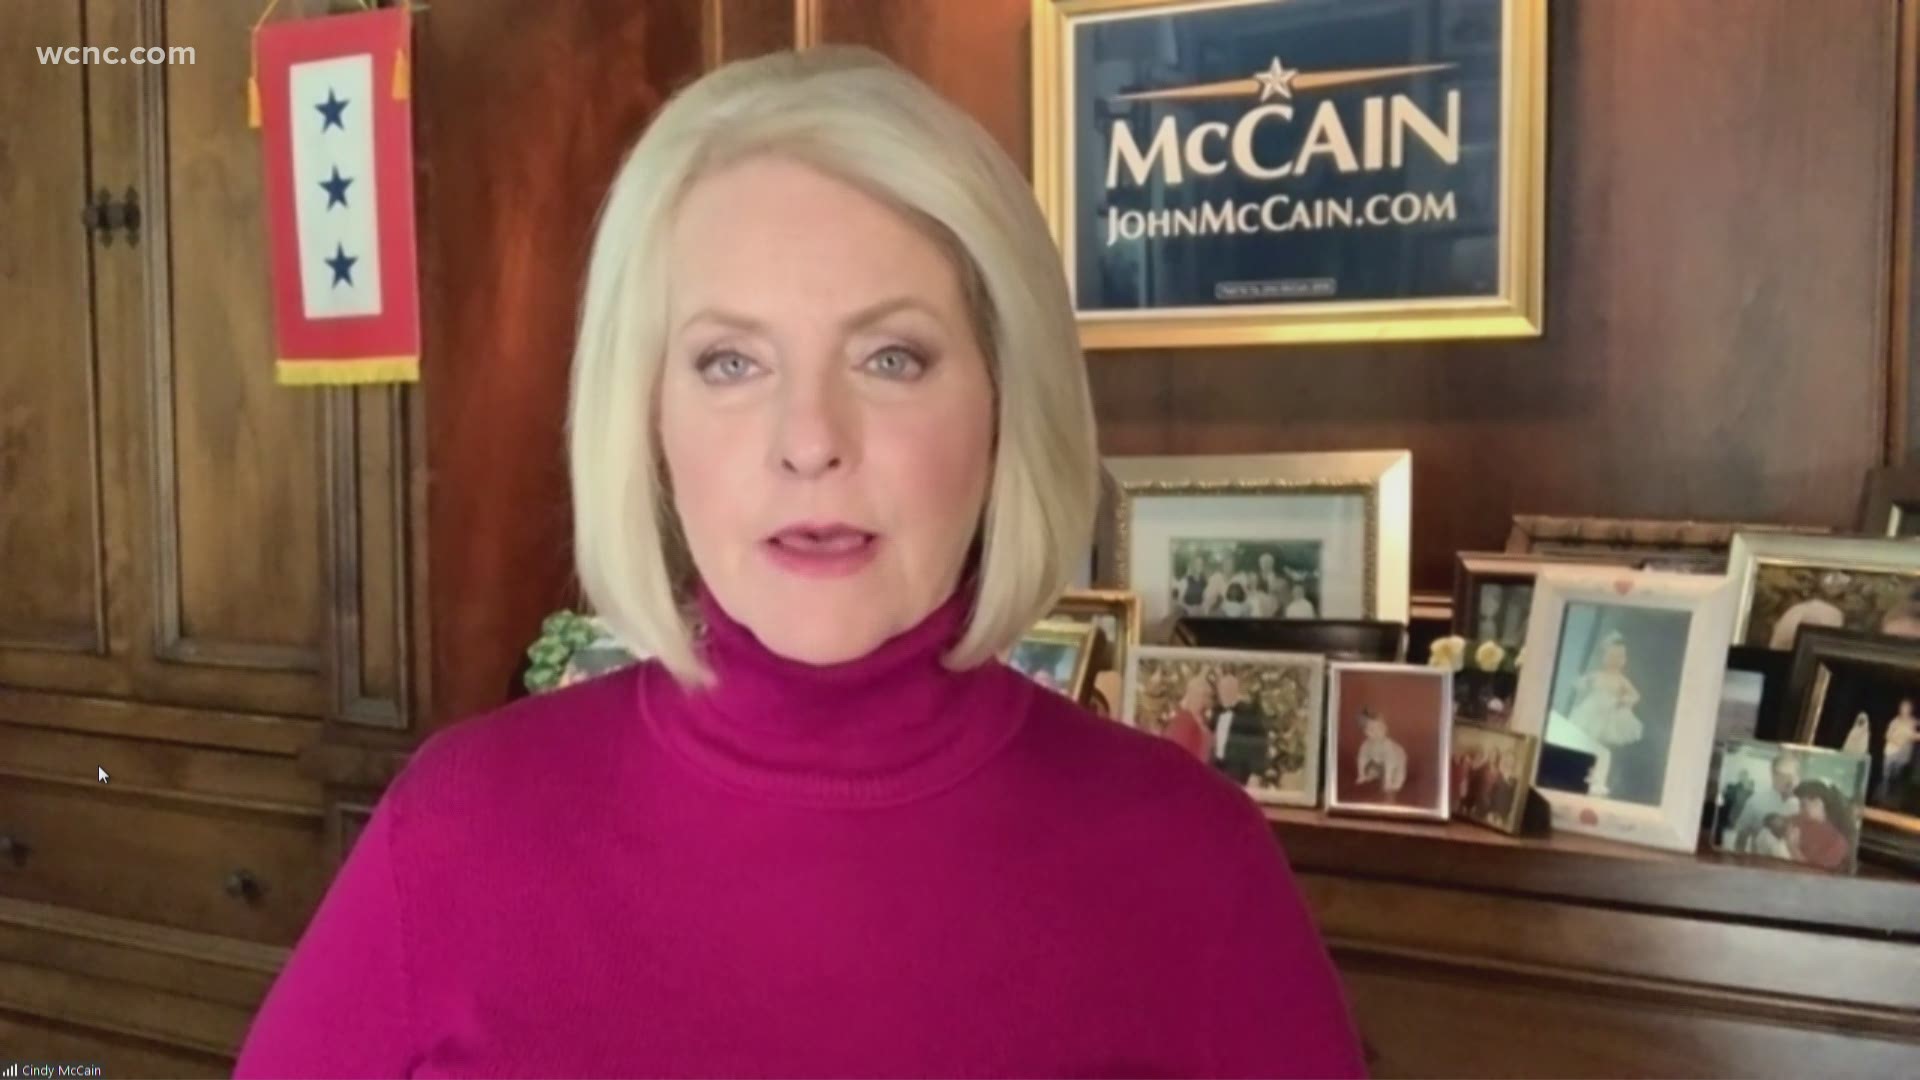 Cindy McCain speaks out on her process to decide who she wanted to endorse for president.